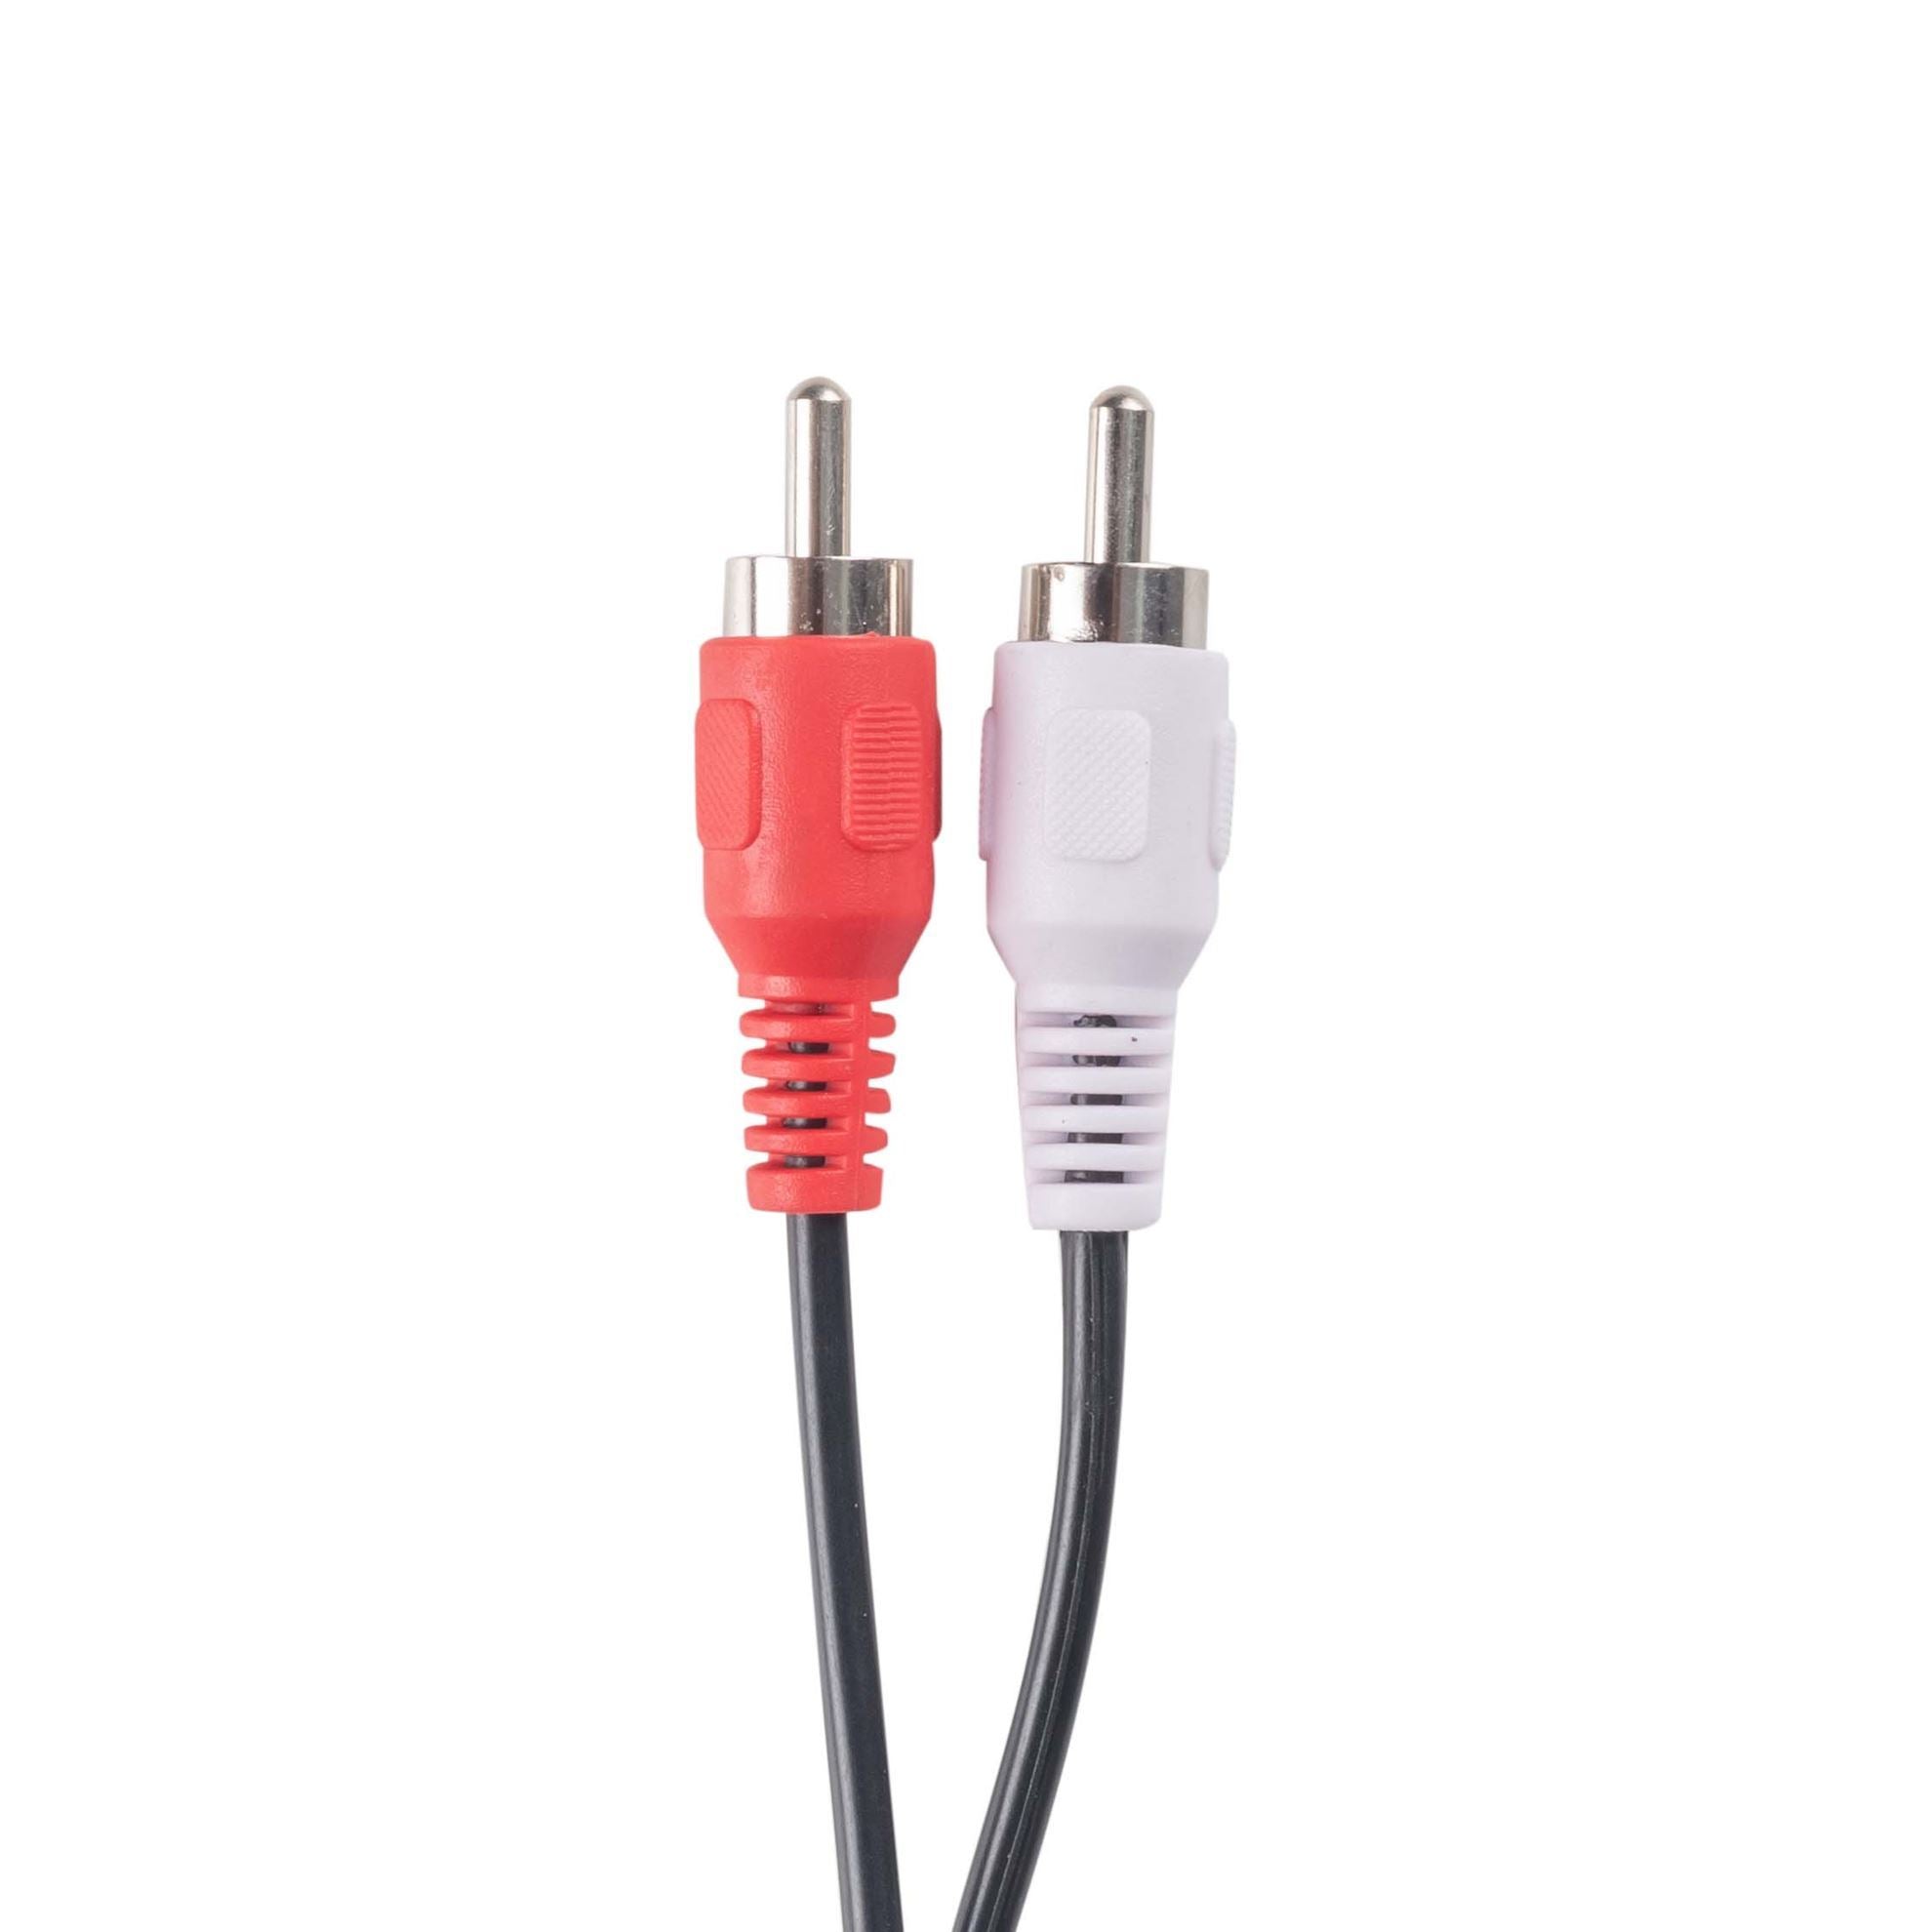 DYNAMIX_5m_RCA_Audio_Cable_2_RCA_to_2_RCA_Plugs,_Coloured_Red_&_White 400